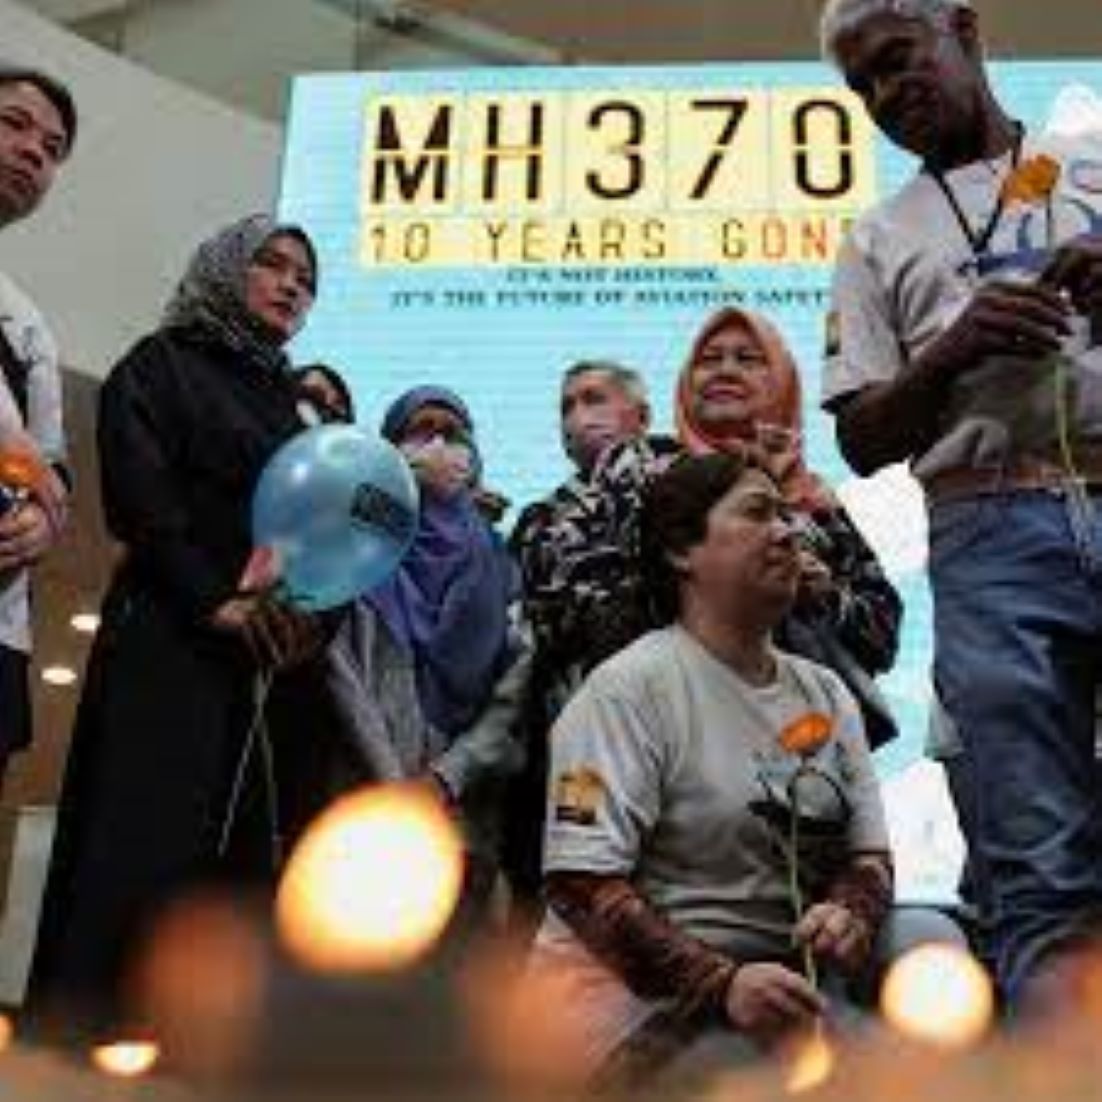 Families Of MH370 Victims Marked 10 Years Since Flight Disappearance